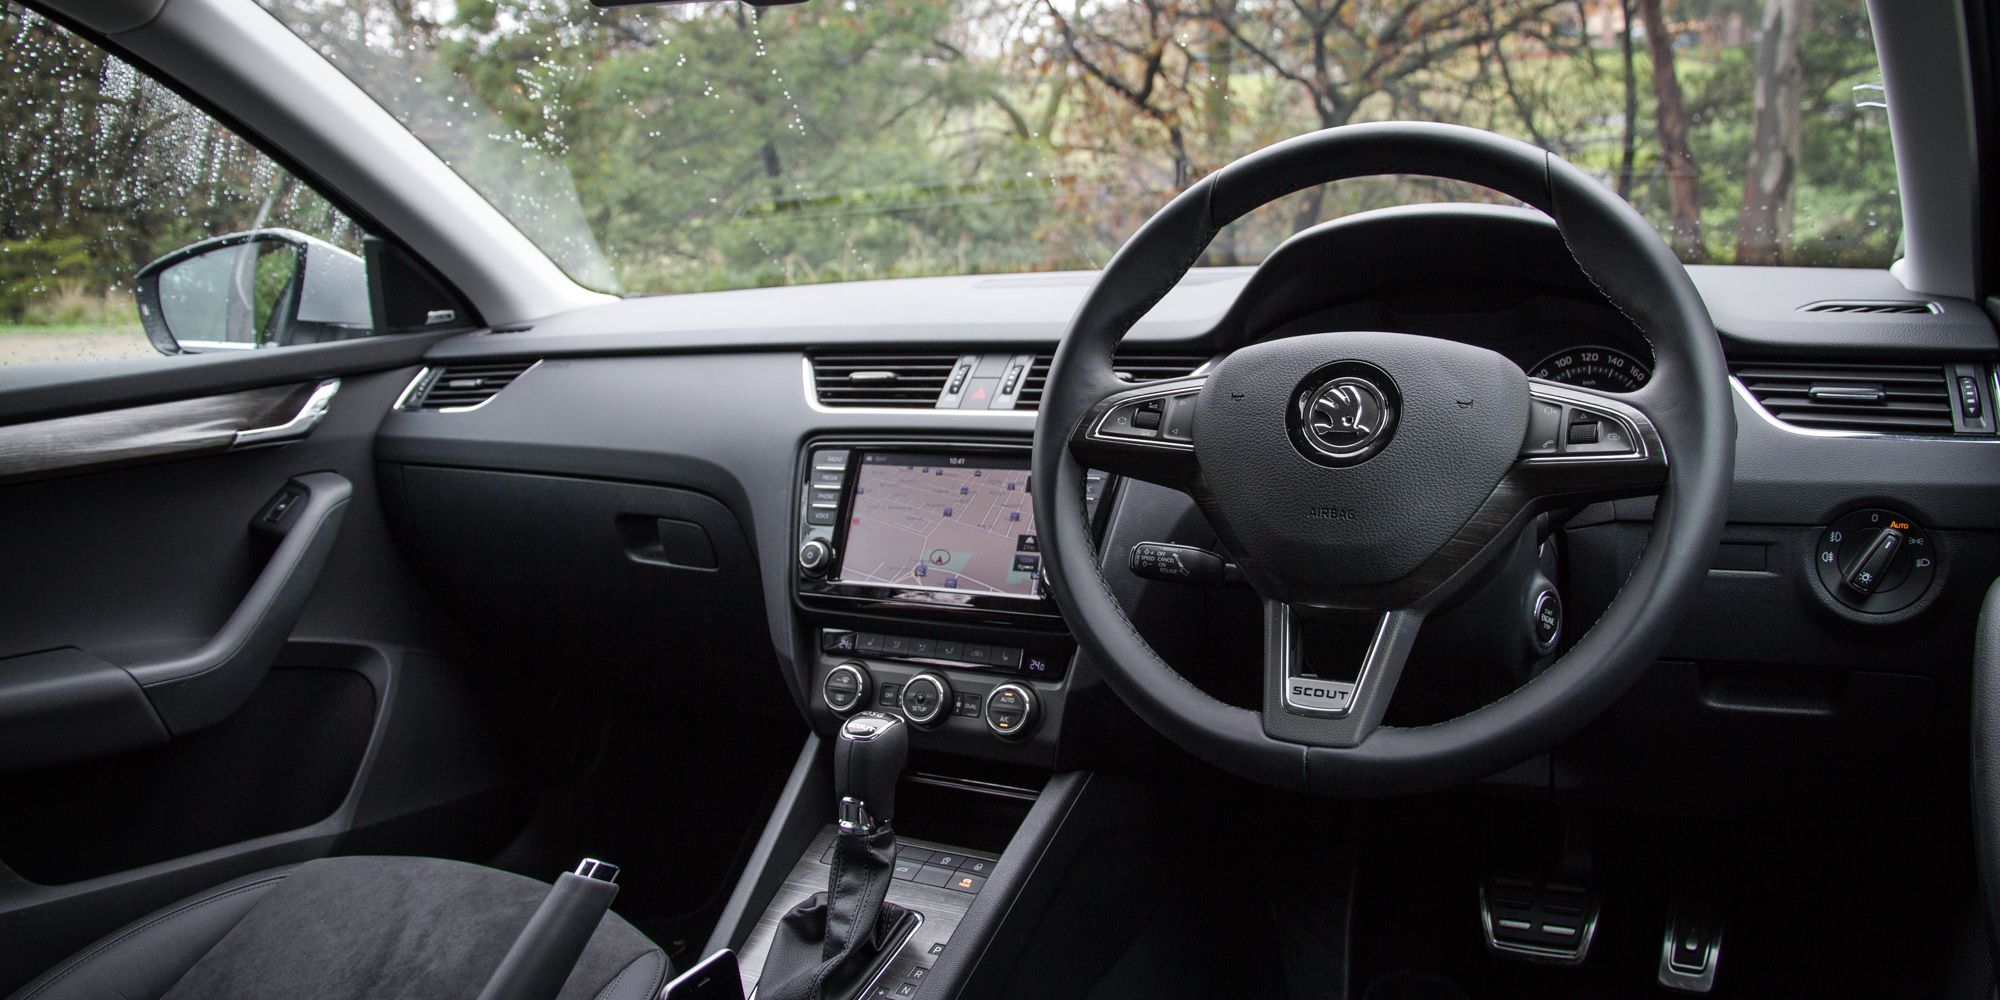 2016 Skoda Octavia Scout Interior Cockpit And Dashboard (View 23 of 23)